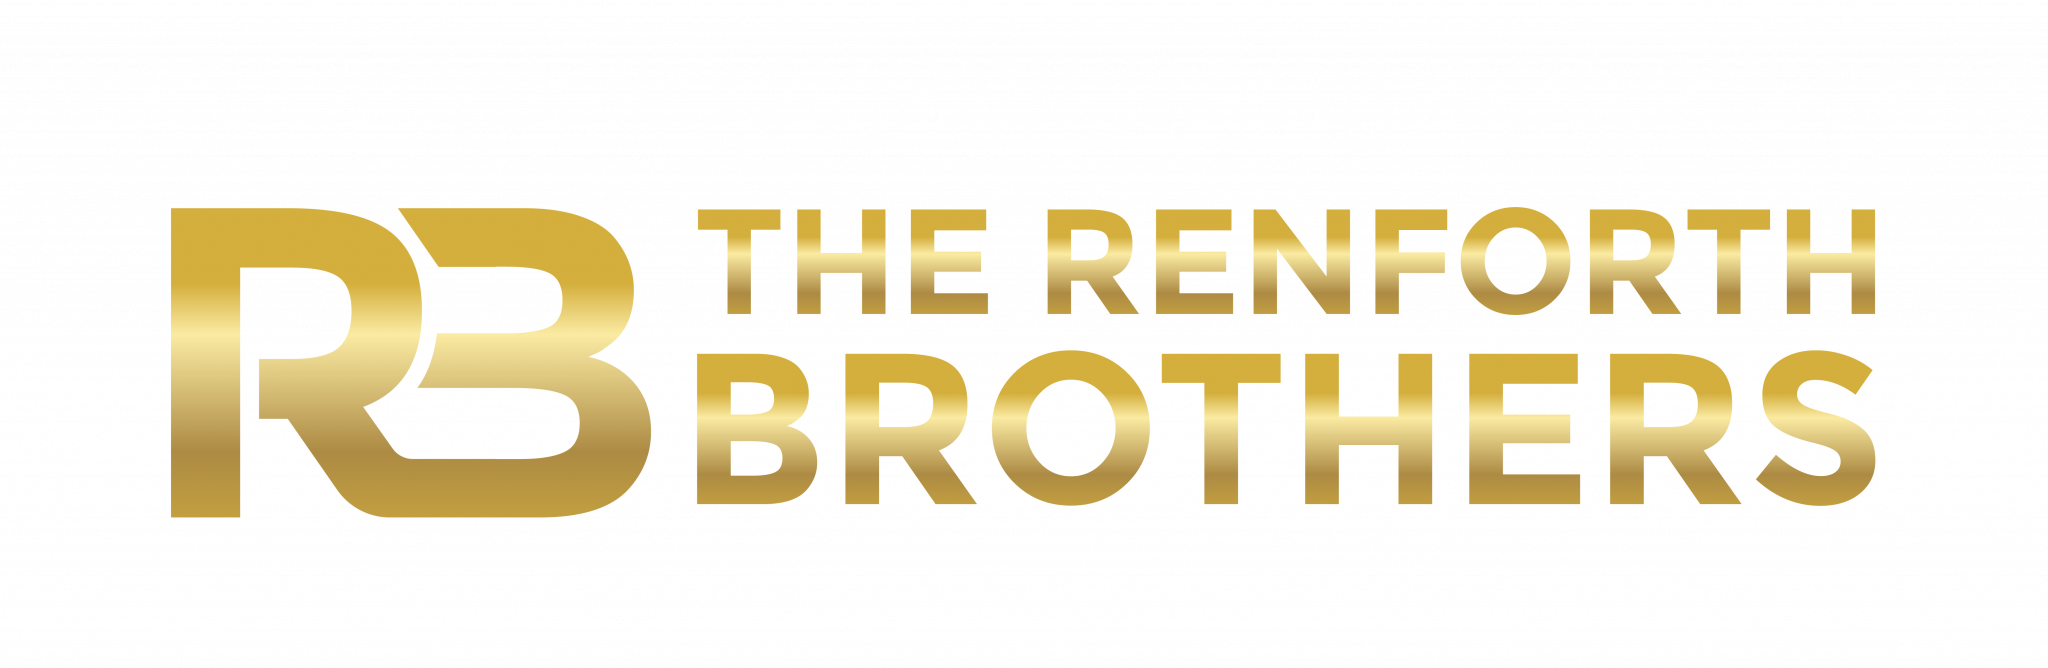 RB The Renforth Brothers_070324_1-01